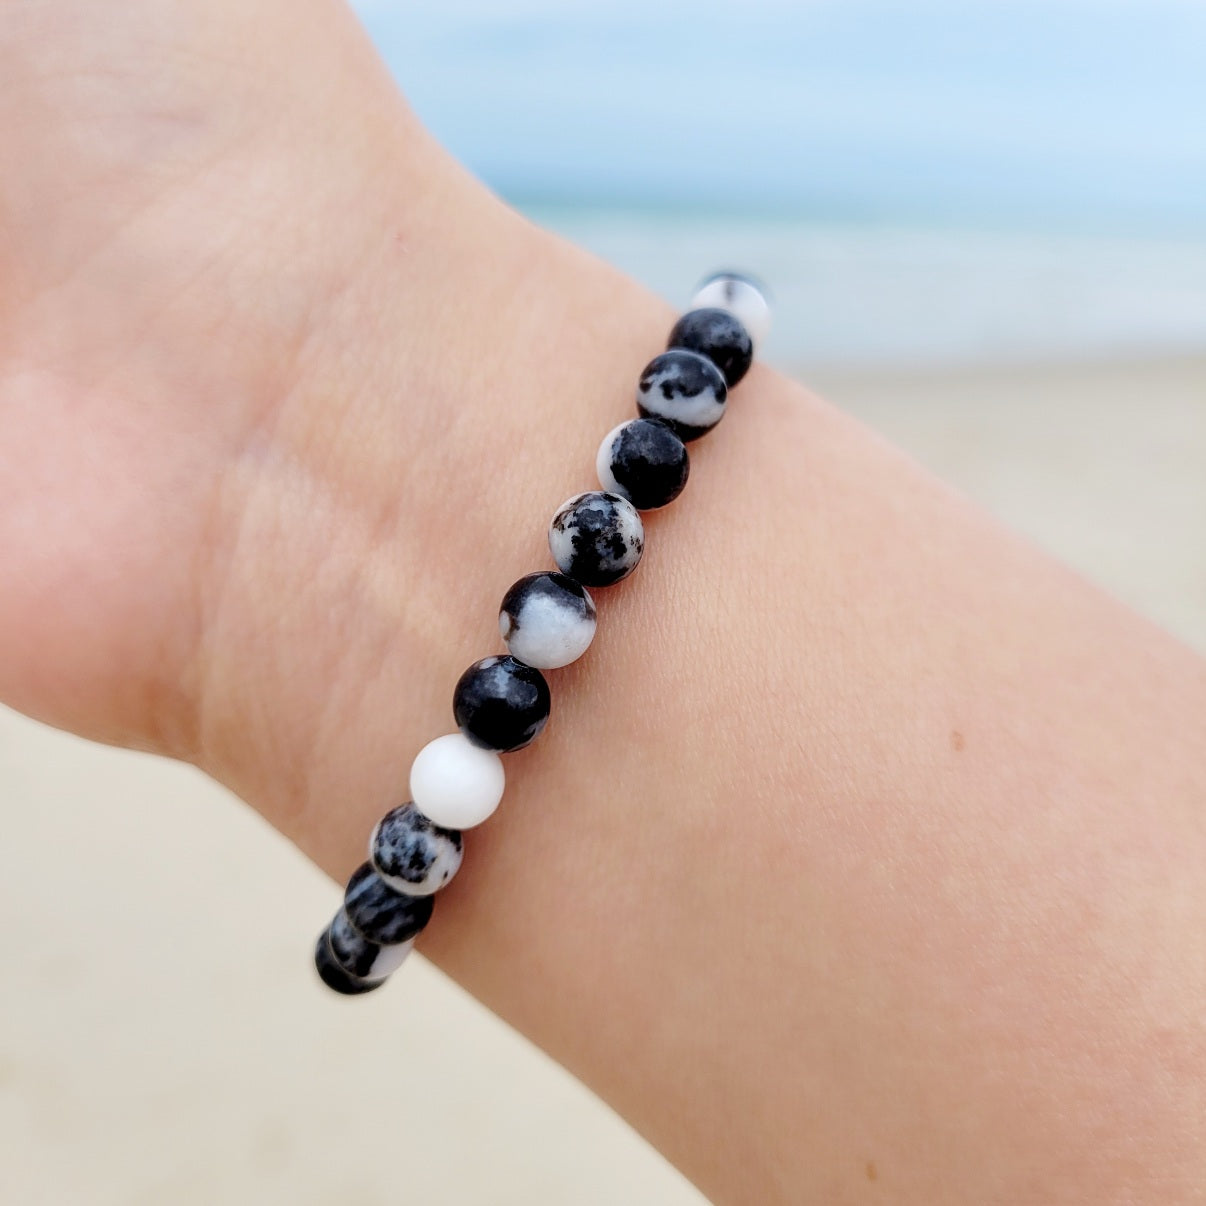 Bali Freshwater Pearl Silicone Bracelet – The Rustic Market